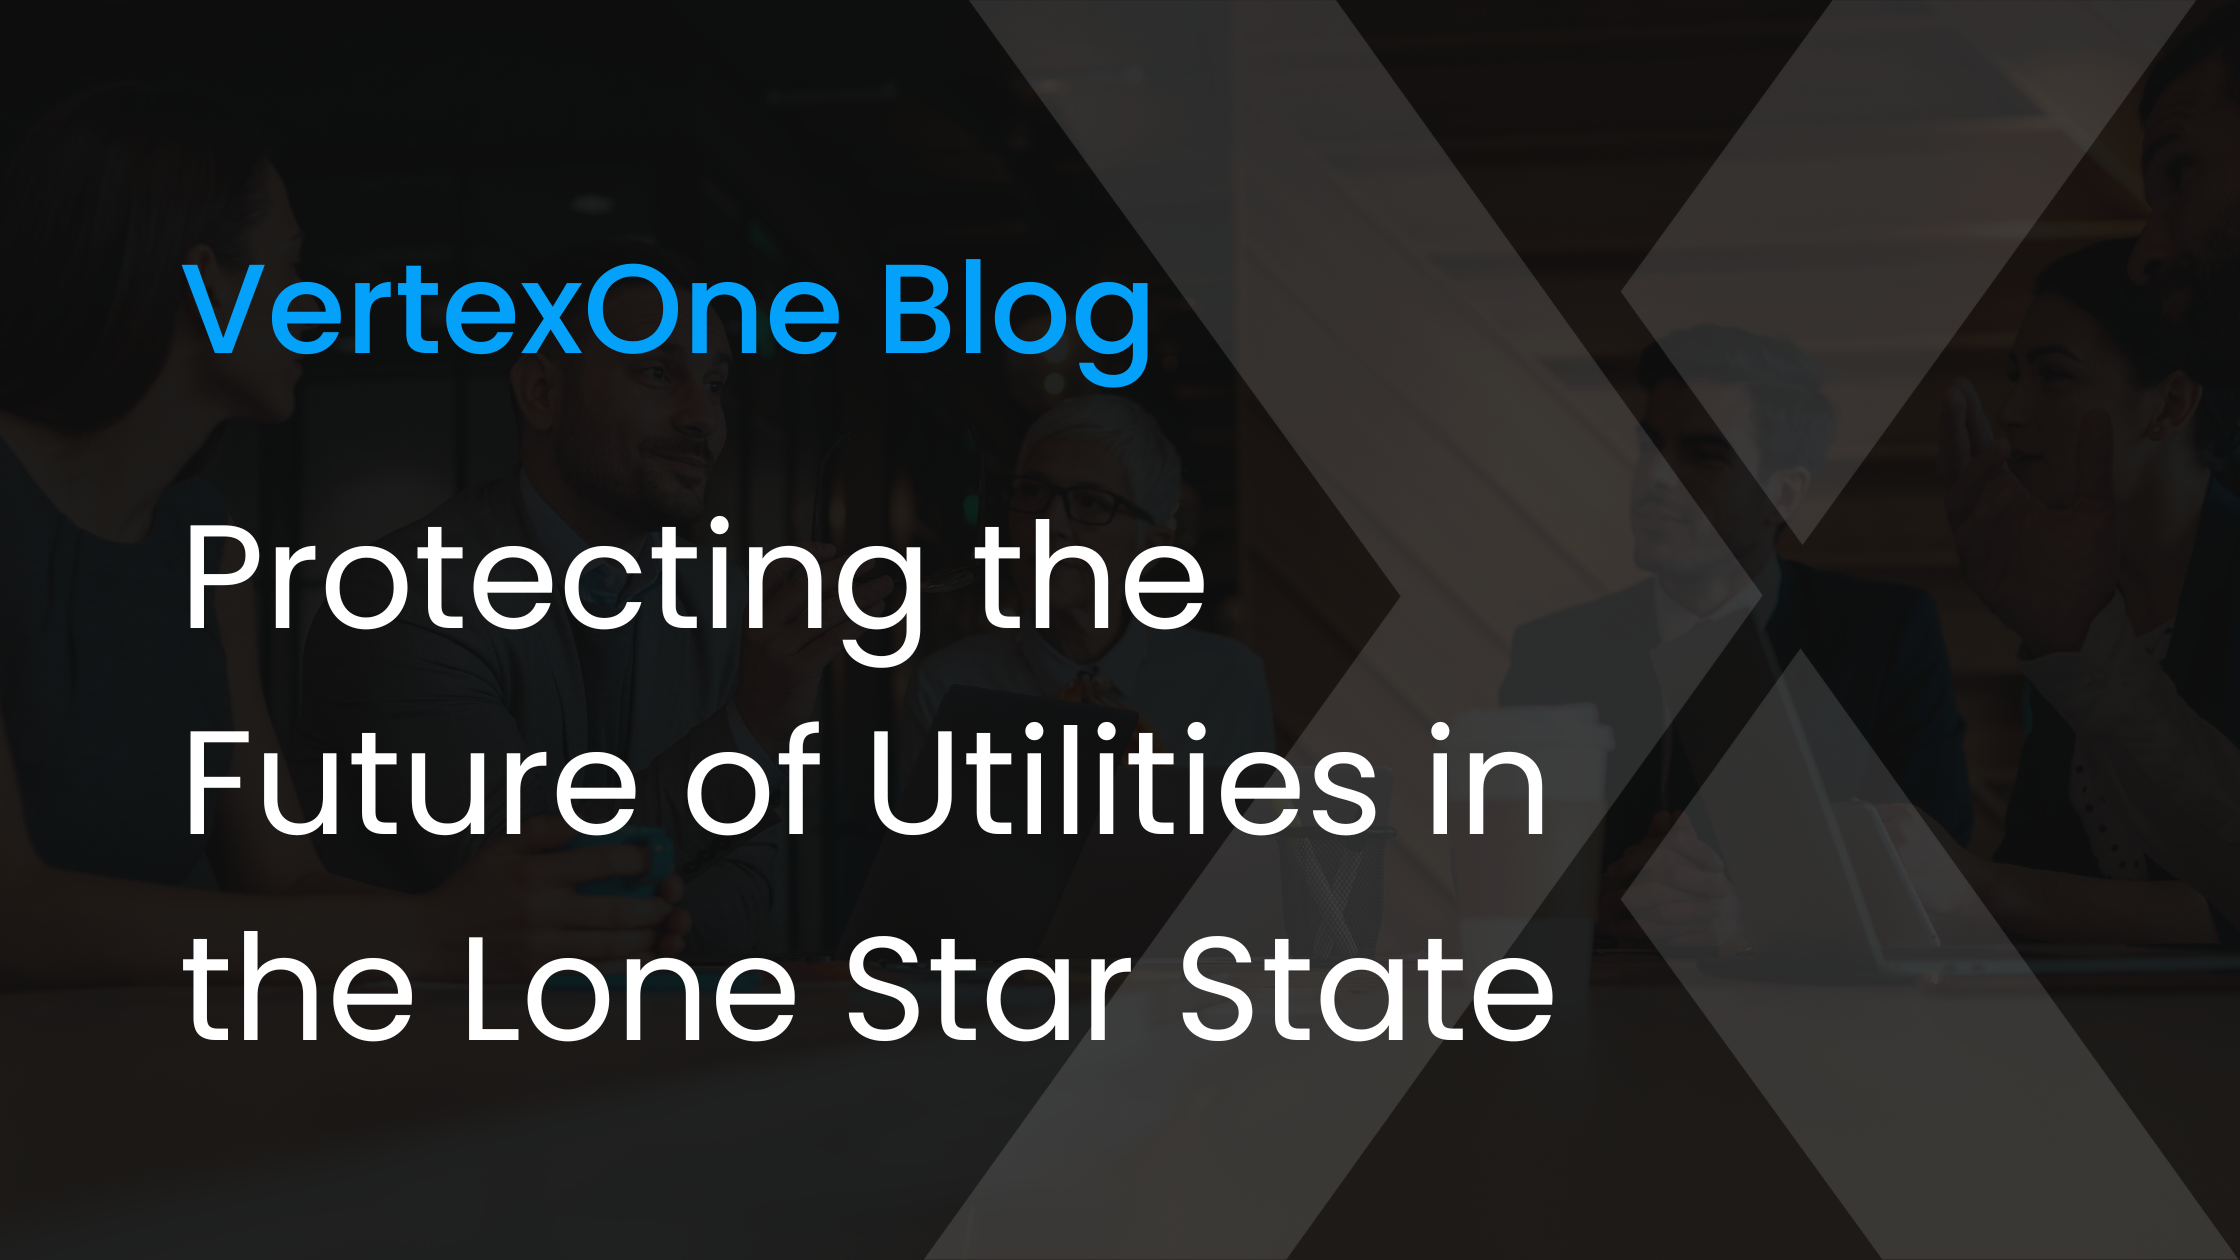 Protecting the Future of Utilities in the Lone Star State